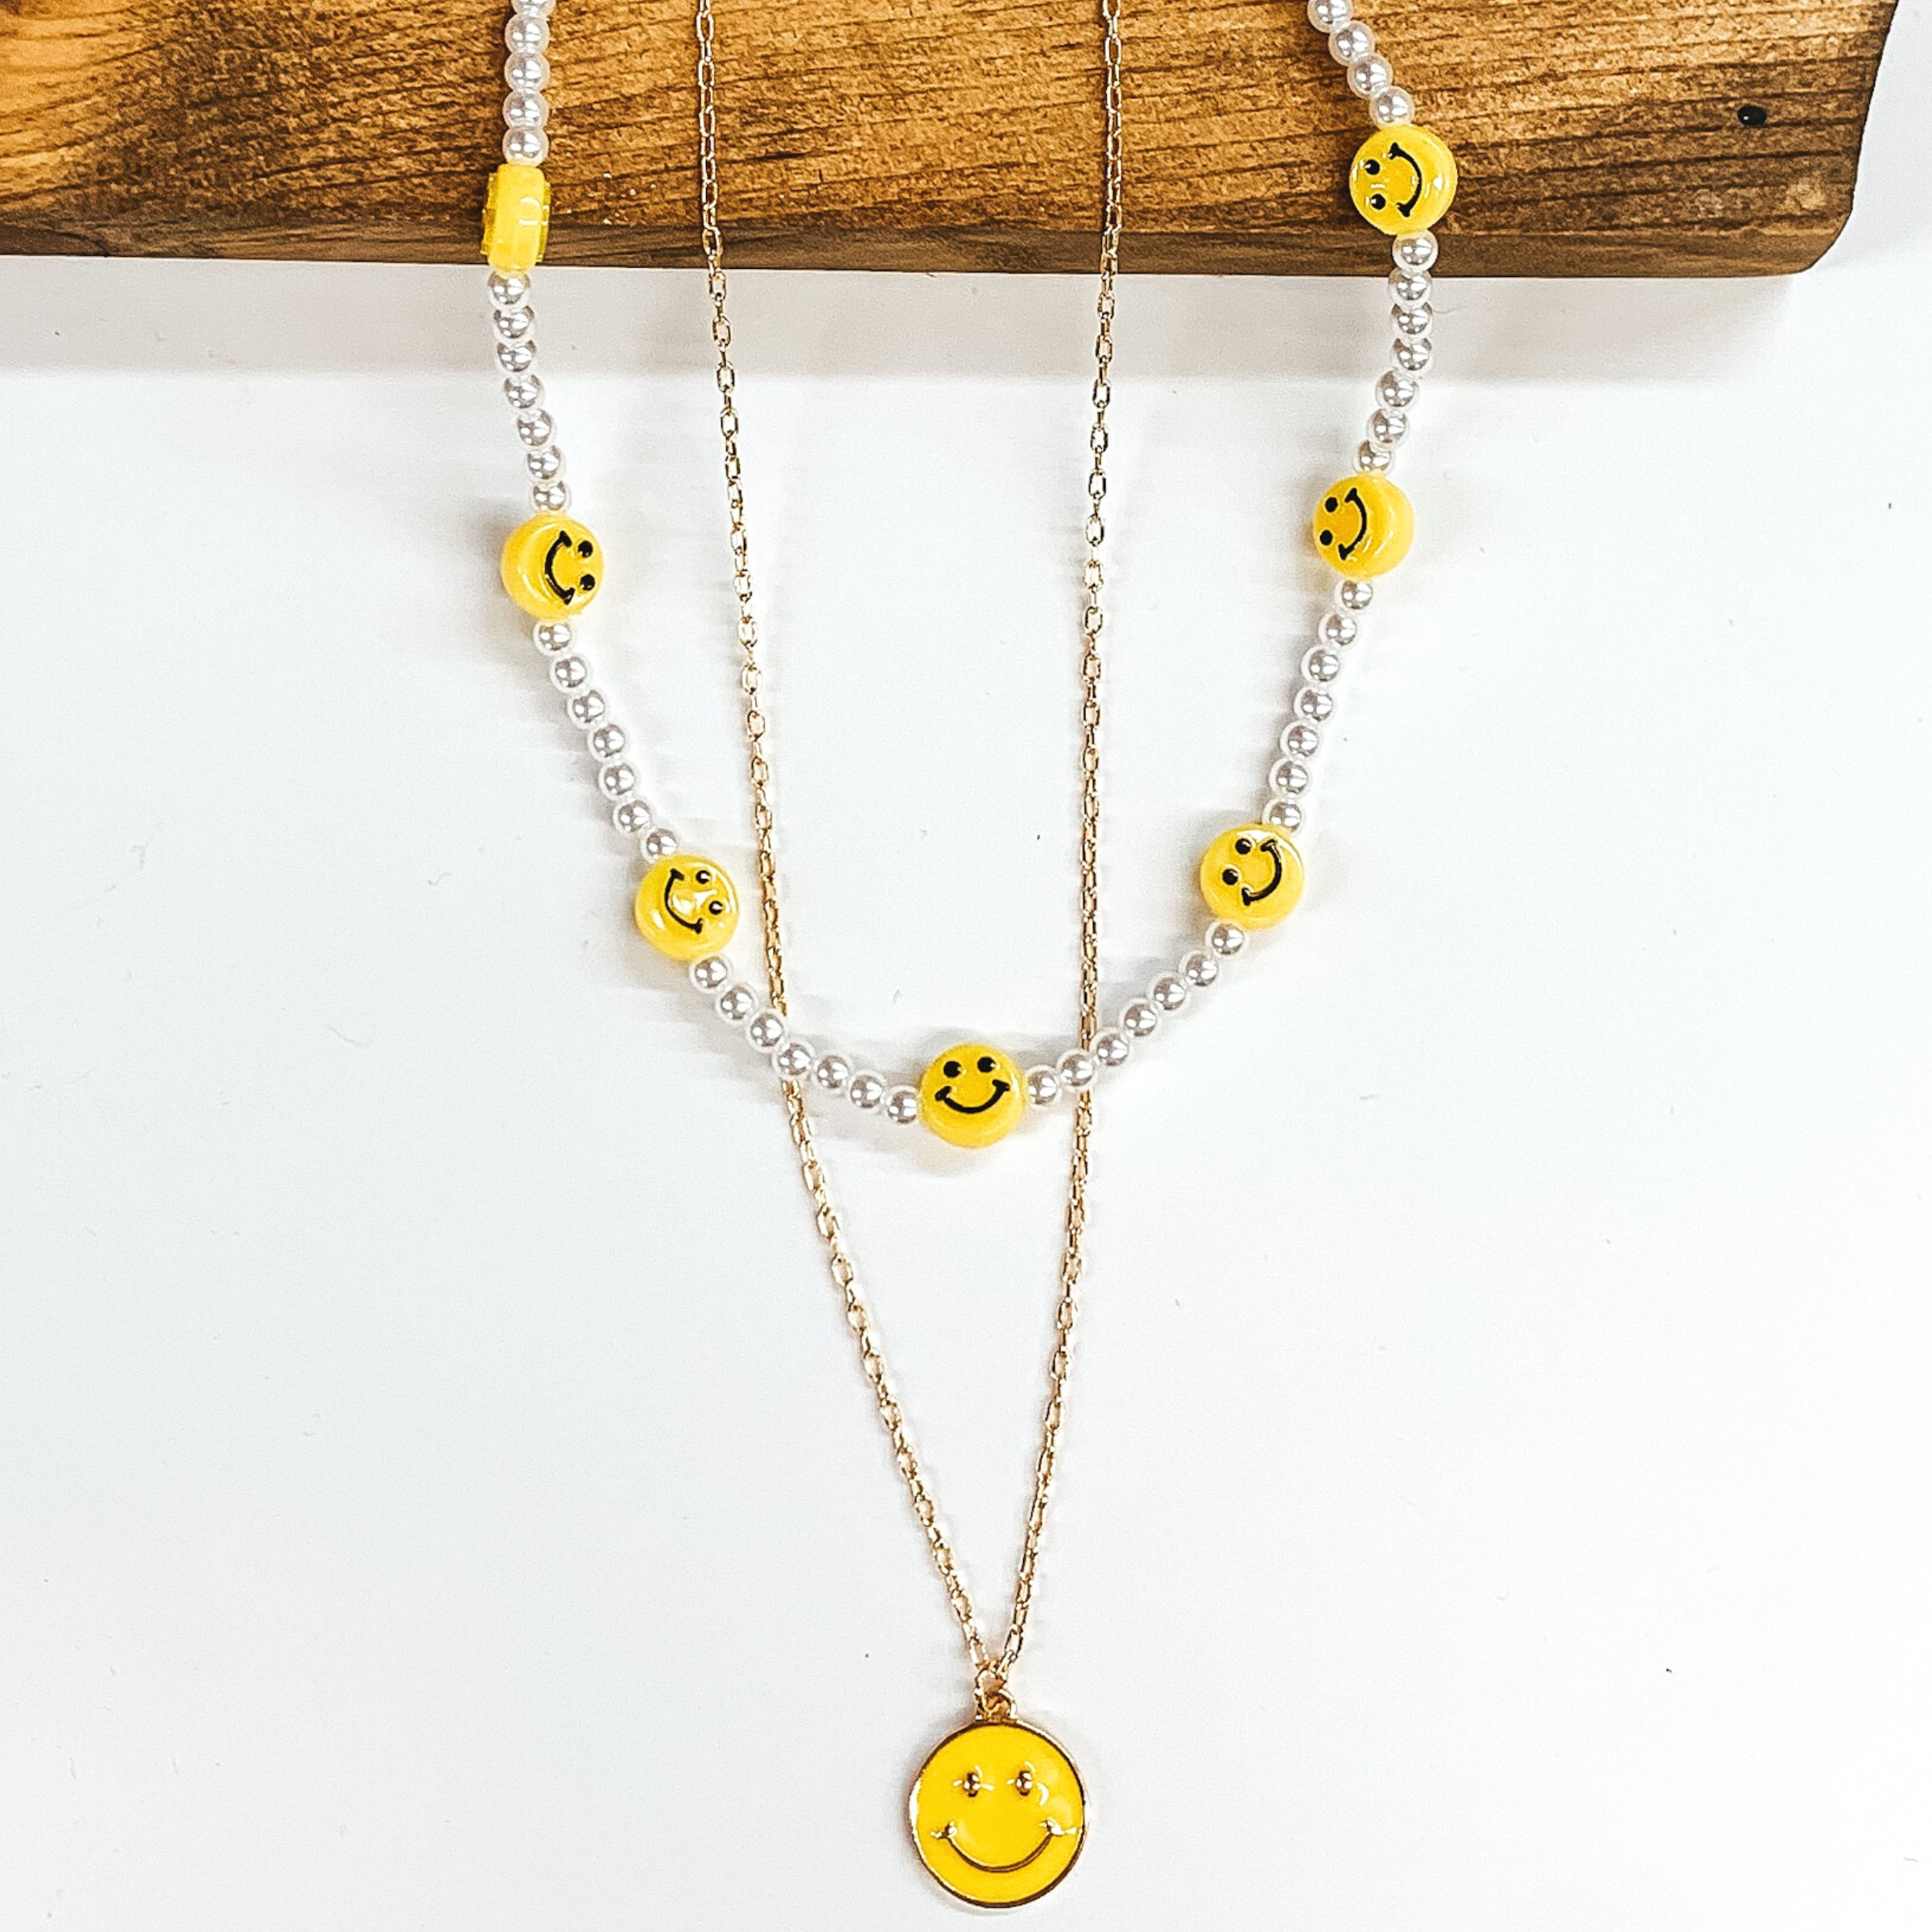 Double layered necklace. The white beaded strand has yellow smiley face charm spacers. The other strand is a gold chained necklace with a yellow circle pendant with a gold smiley face. This necklace is pictures partially laying on a dark piece of wood on a white background. 